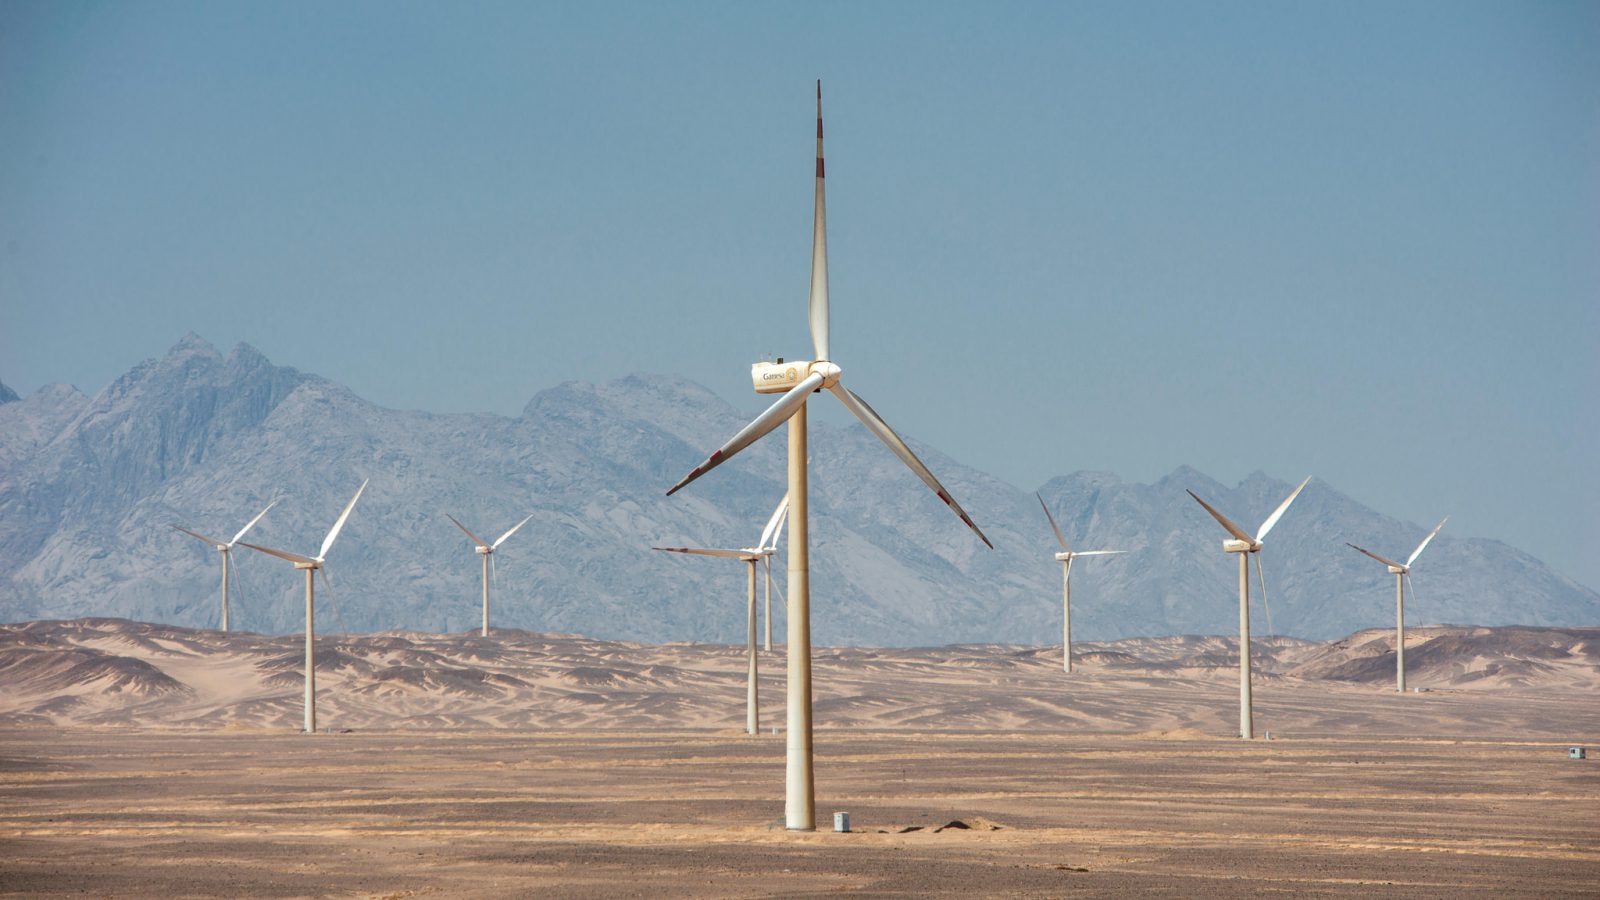 The Gabal El-Zayt windfarm, which covers an area of 43 km2